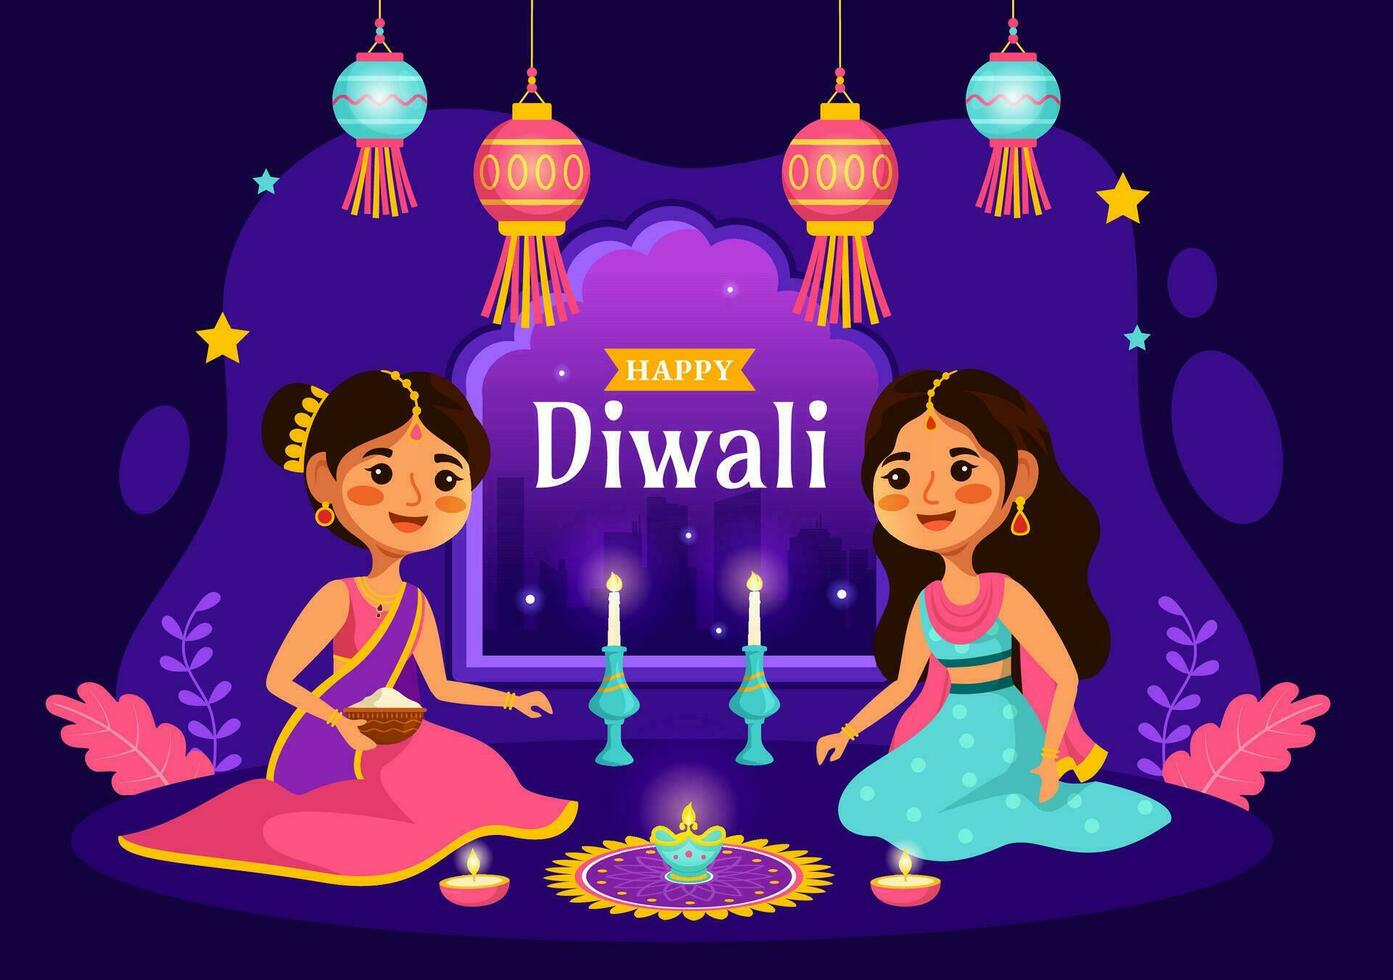 Happy Diwali Hindu Vector Illustration with Indian Rangoli and Fireworks Background for Light Festival of India in Flat Kids Cartoon Design